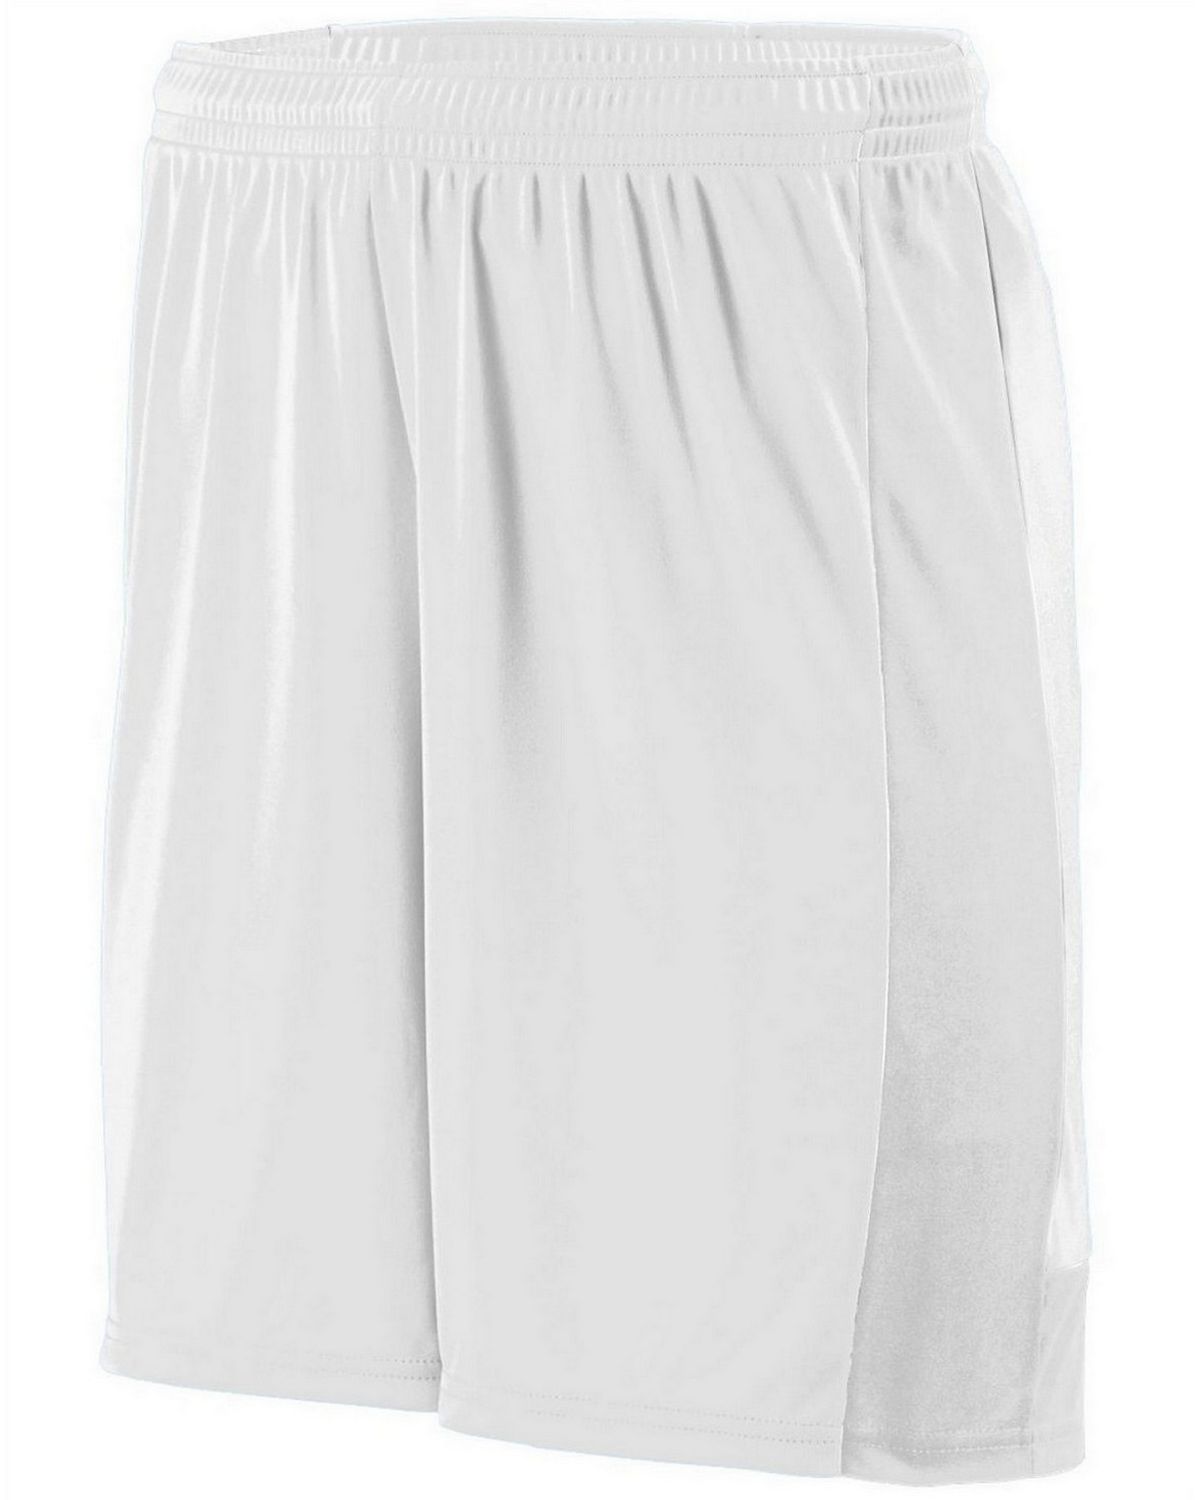 Augusta Sportswear 1605 Men's Wicking Polyester Short with Contrast Inserts